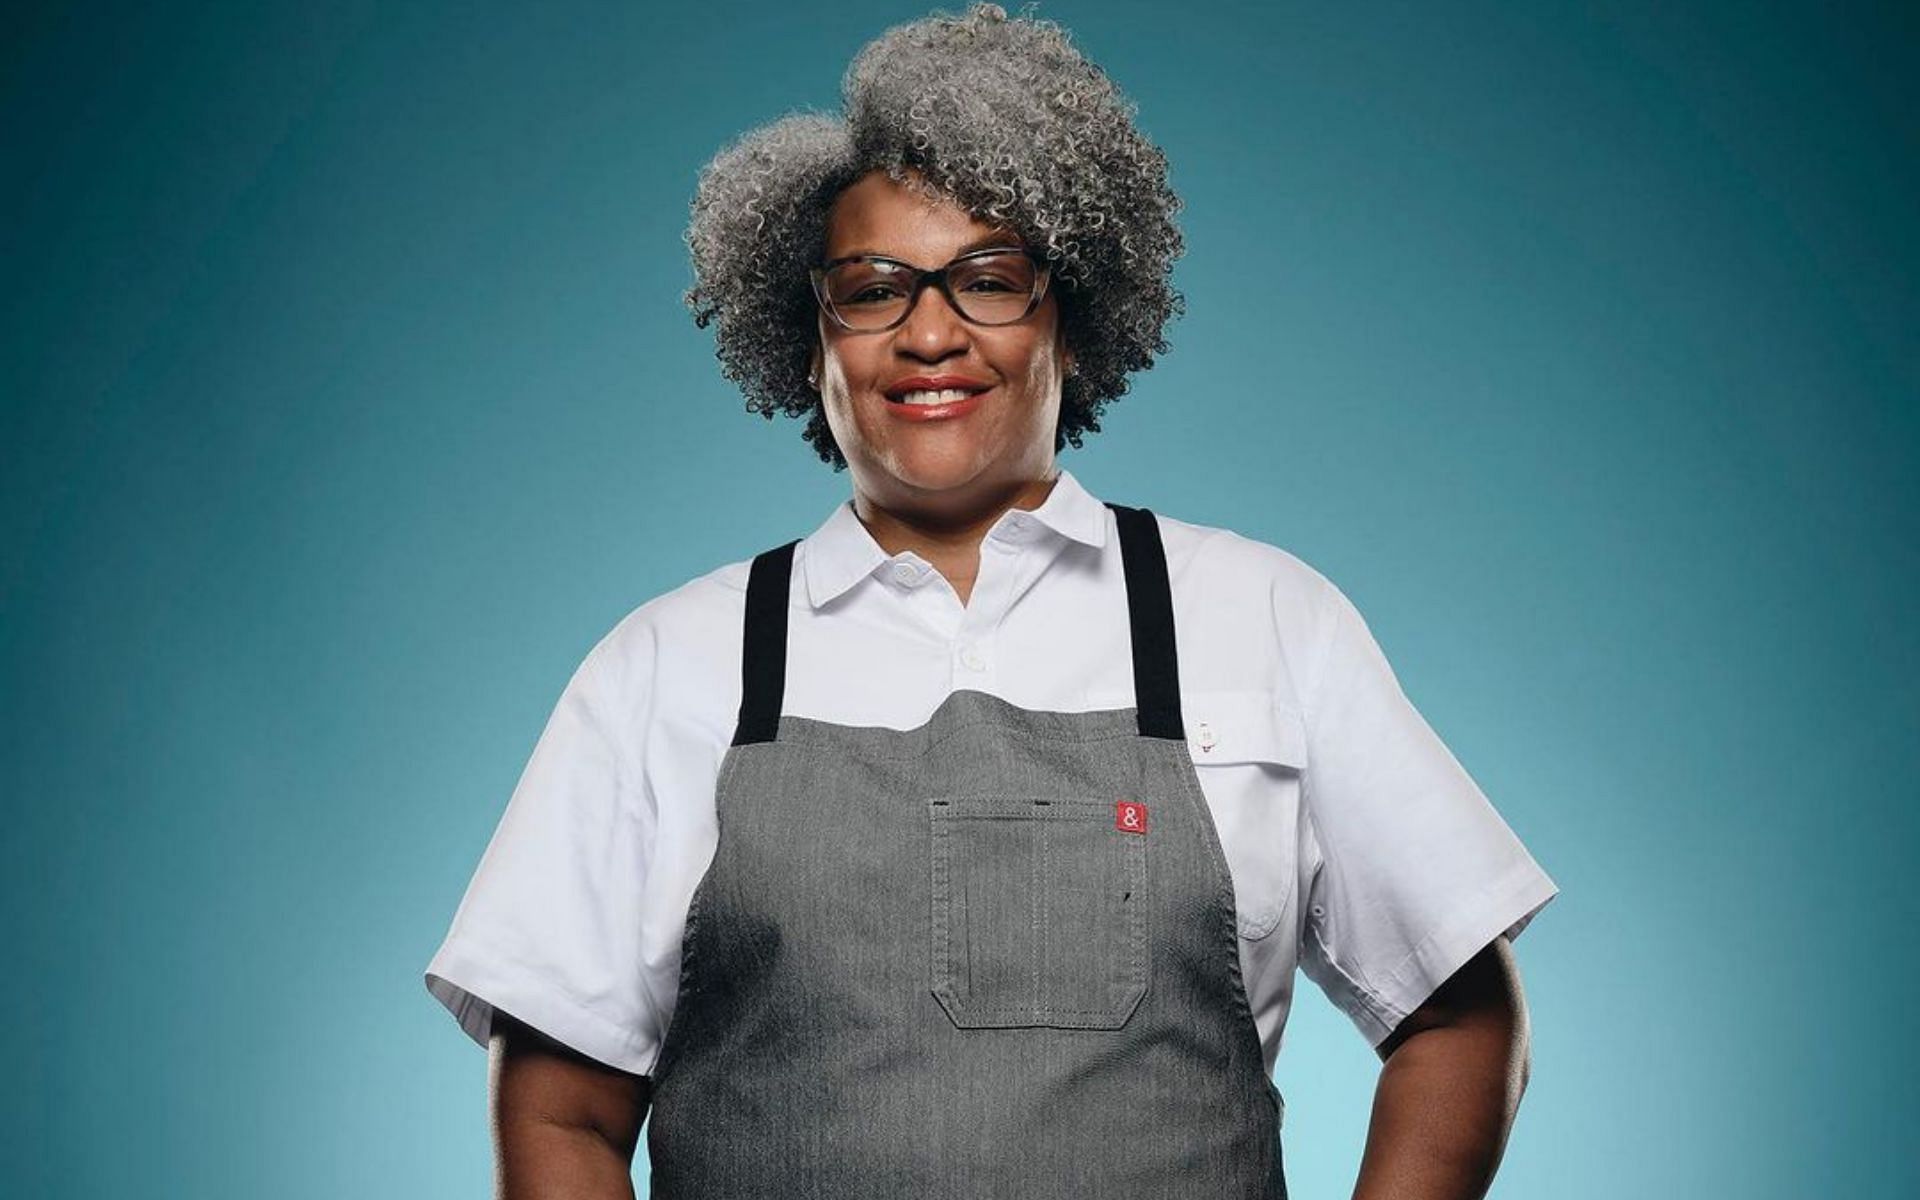 Meet Courtney Brown from &lsquo;Next Level Chef&rsquo; (Image via chefcourt1/ Instagram)